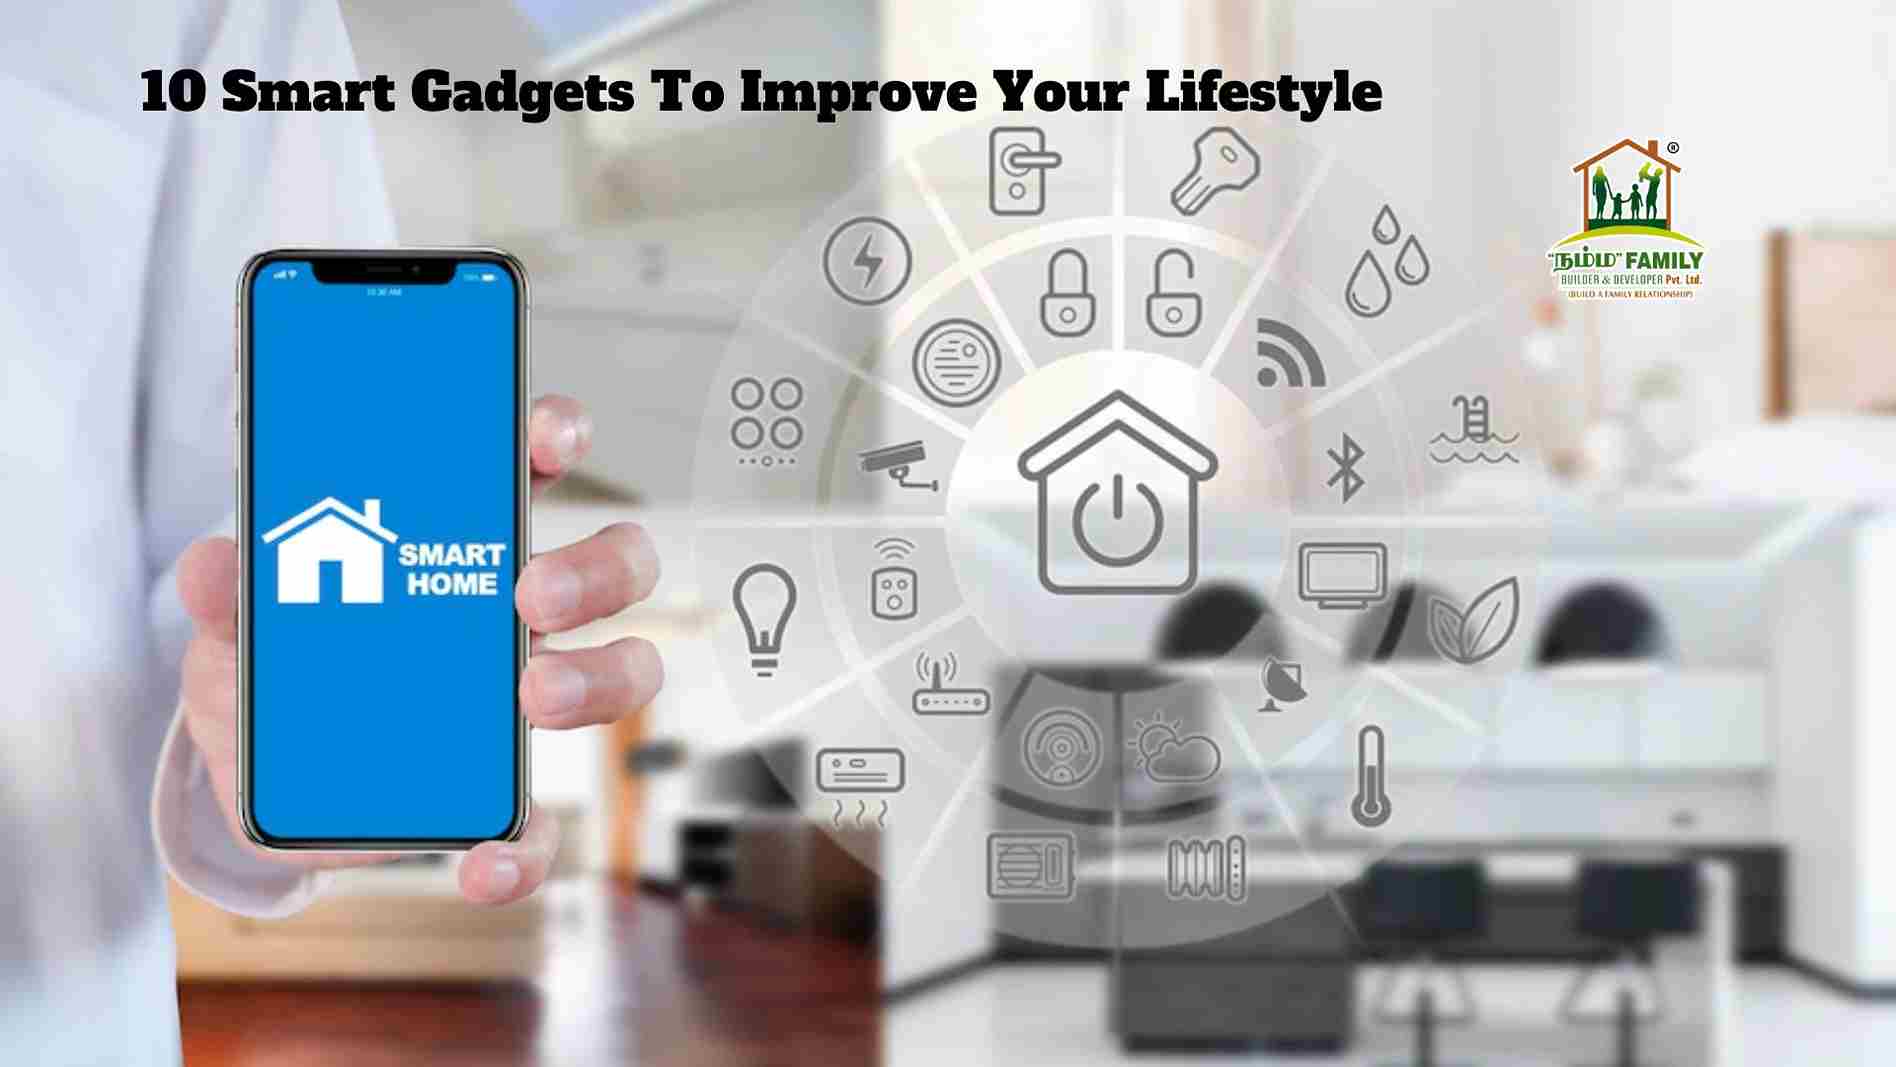 Top 9 Smart Gadgets To Improve Your Lifestyle - Namma Family Builder